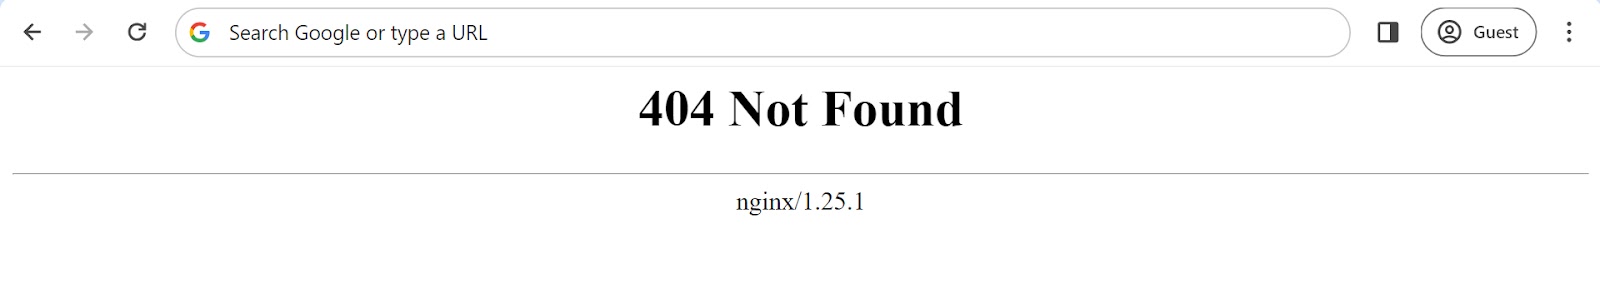 A basic 404 page with "404 Not Found" message